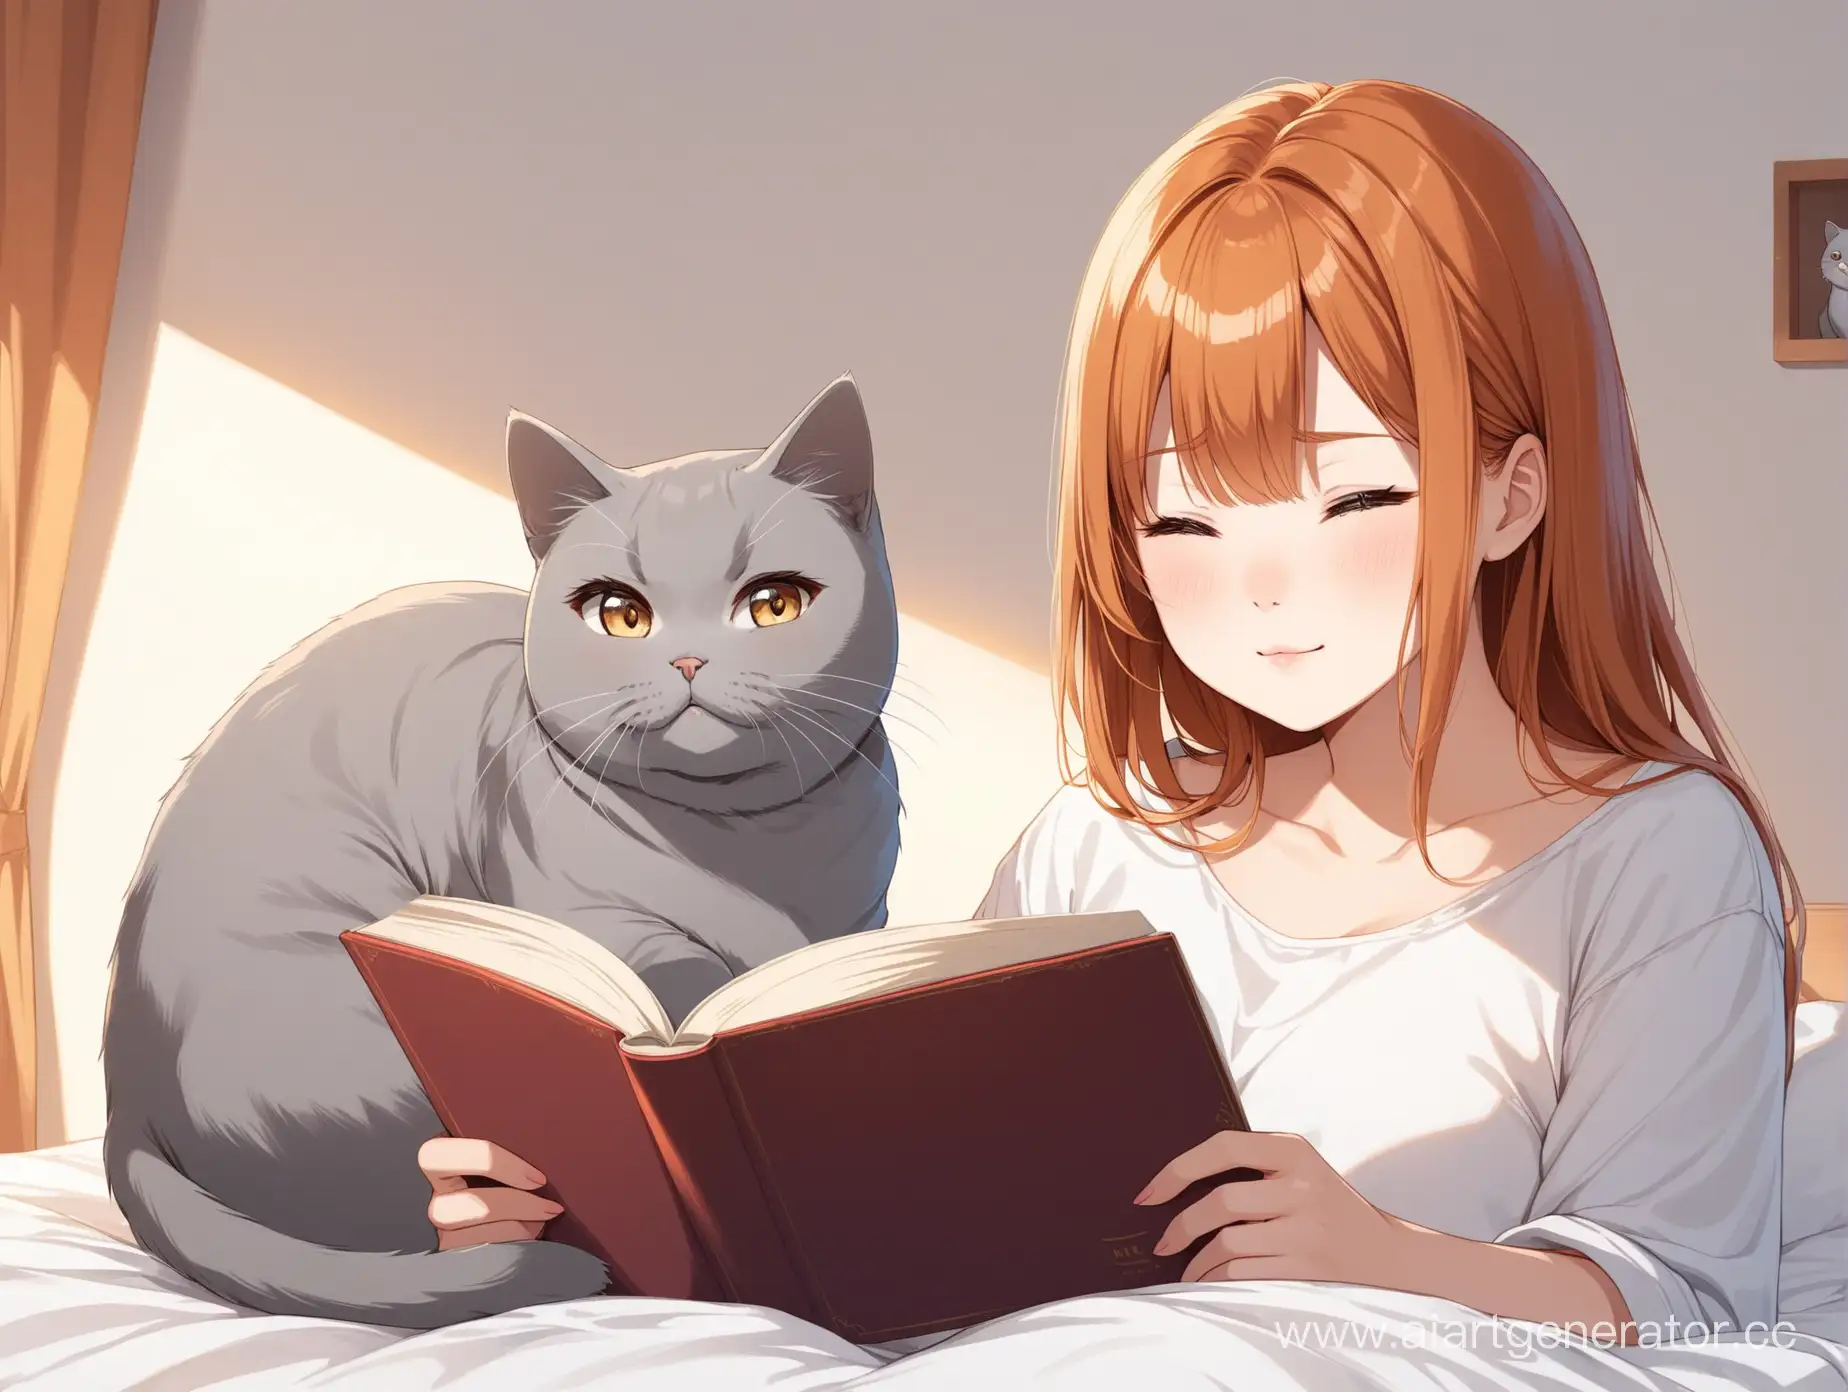 Young-Woman-with-ReddishGolden-Hair-Reading-with-British-Shorthair-Cat-in-Bedroom